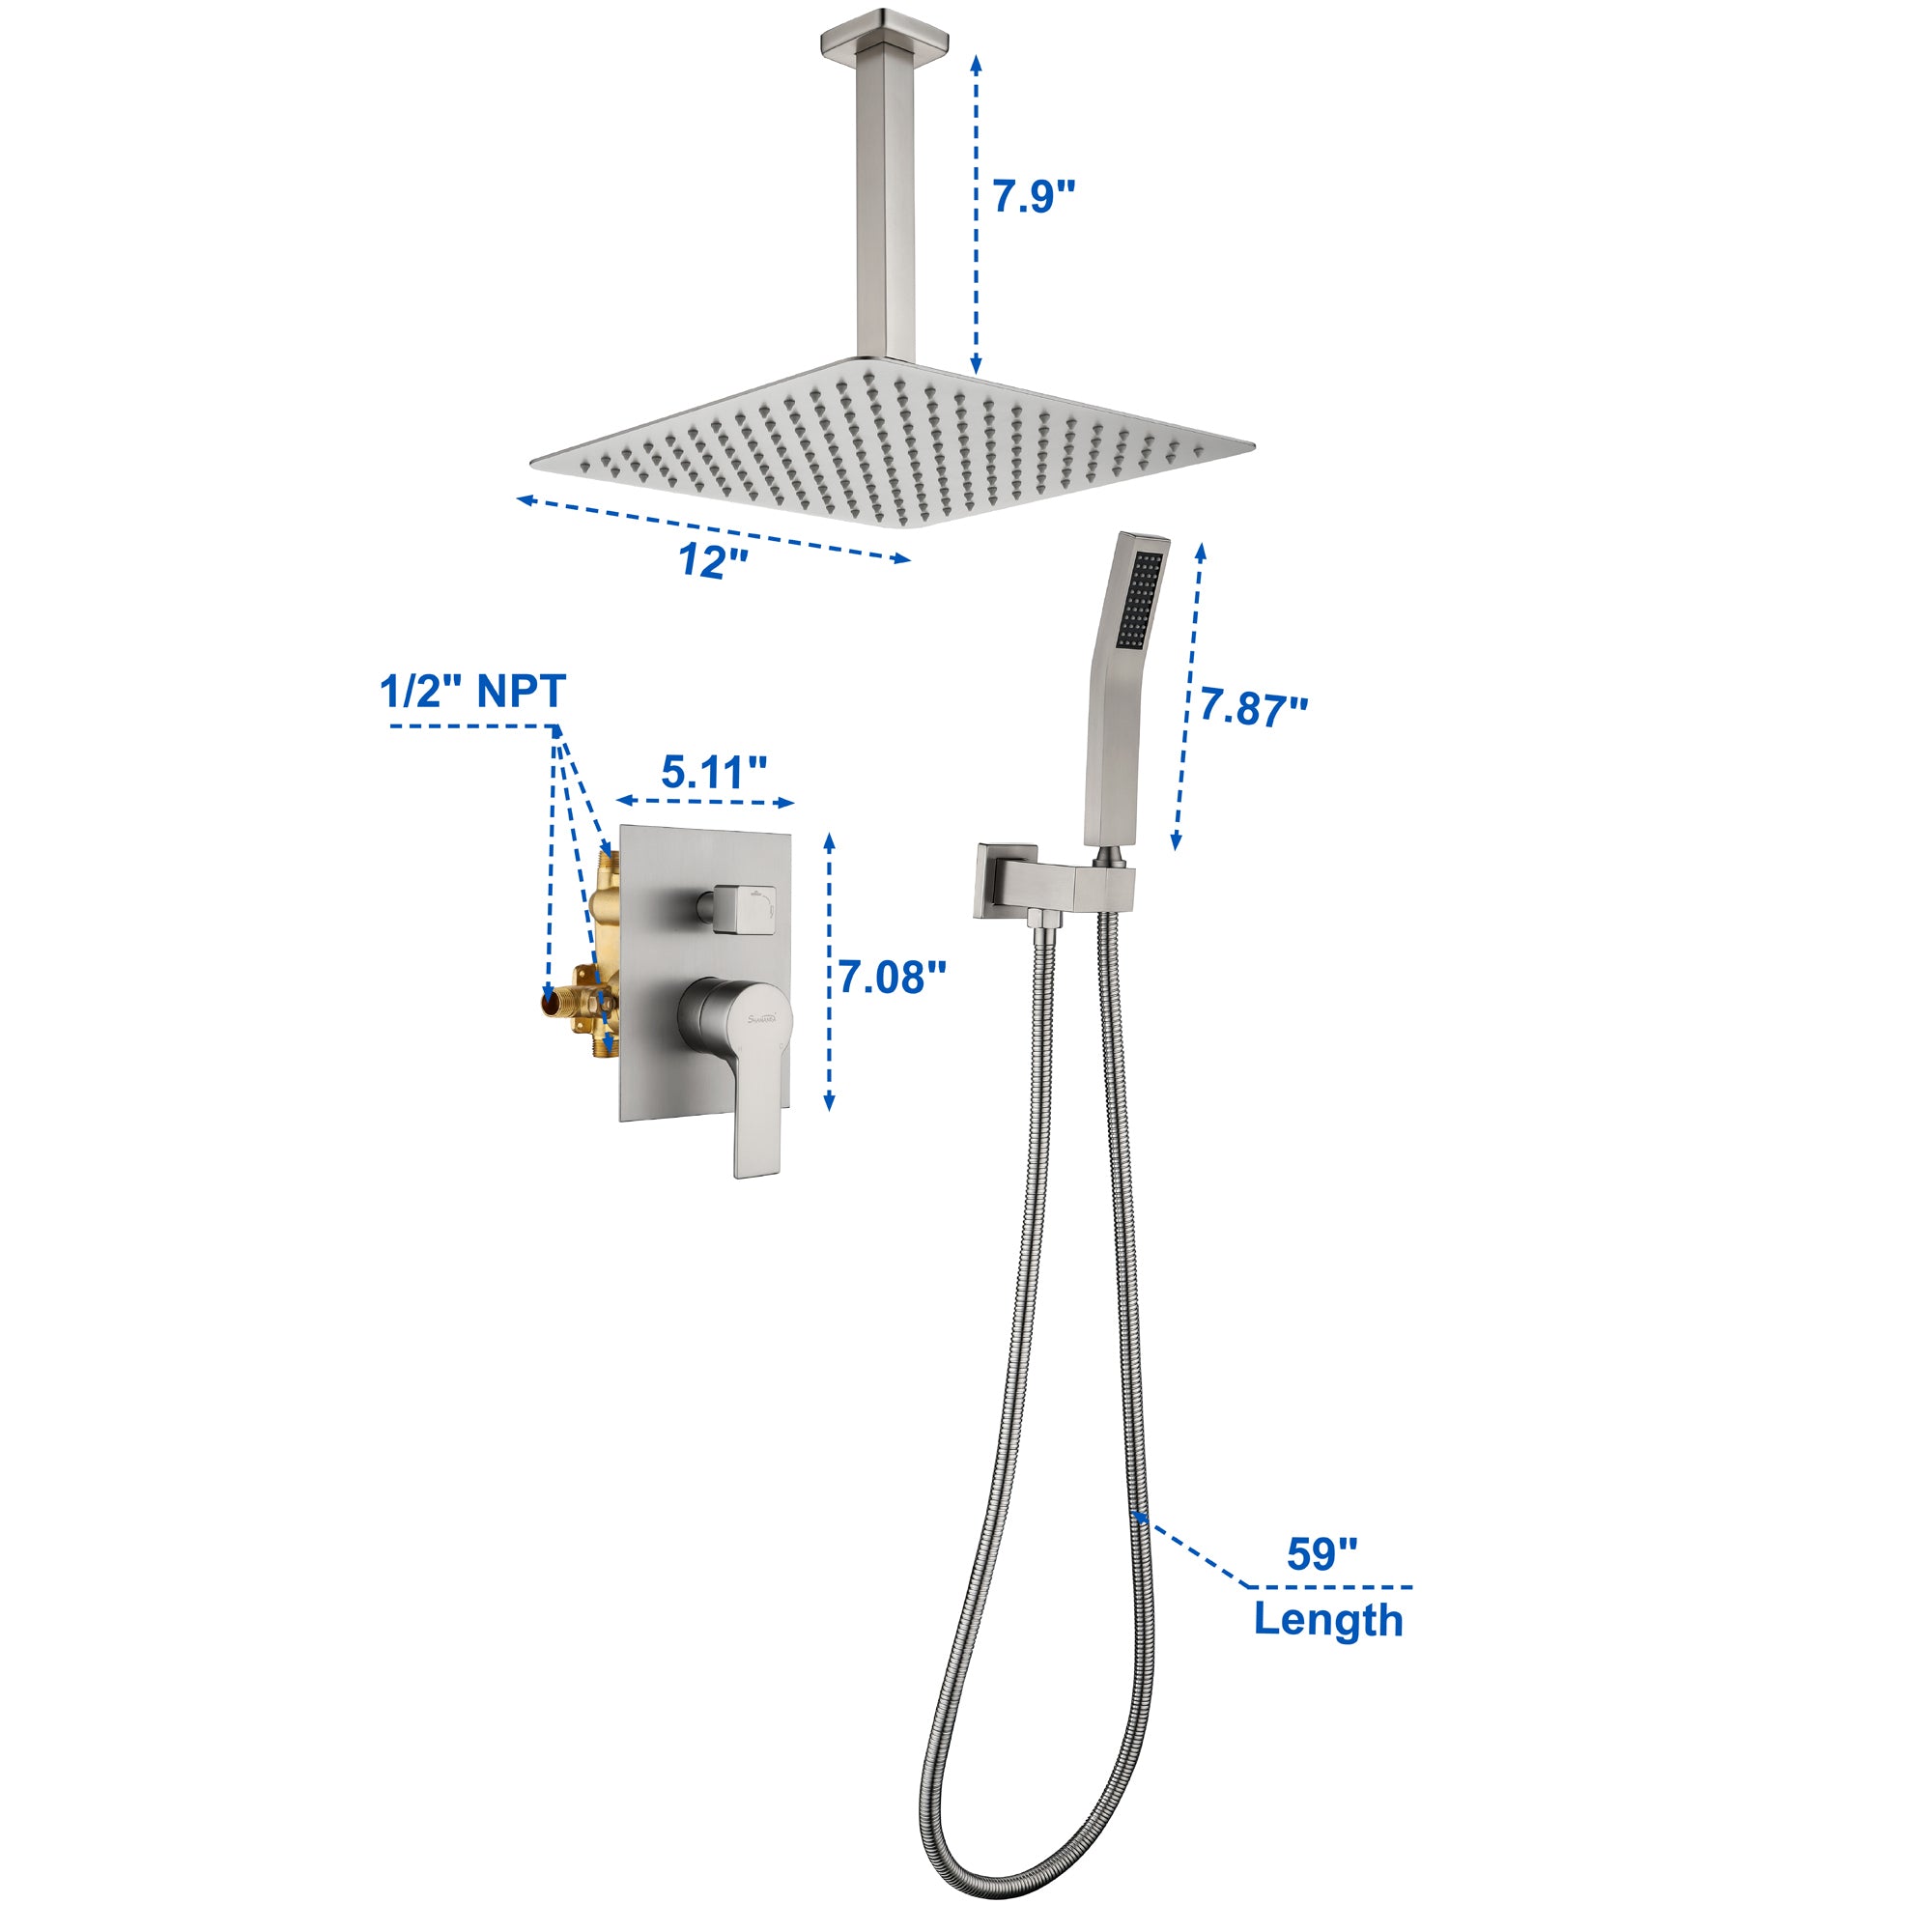 11 Ceiling Rainfall Shower Faucet System Combo with Hand Shower - Silver RB1023